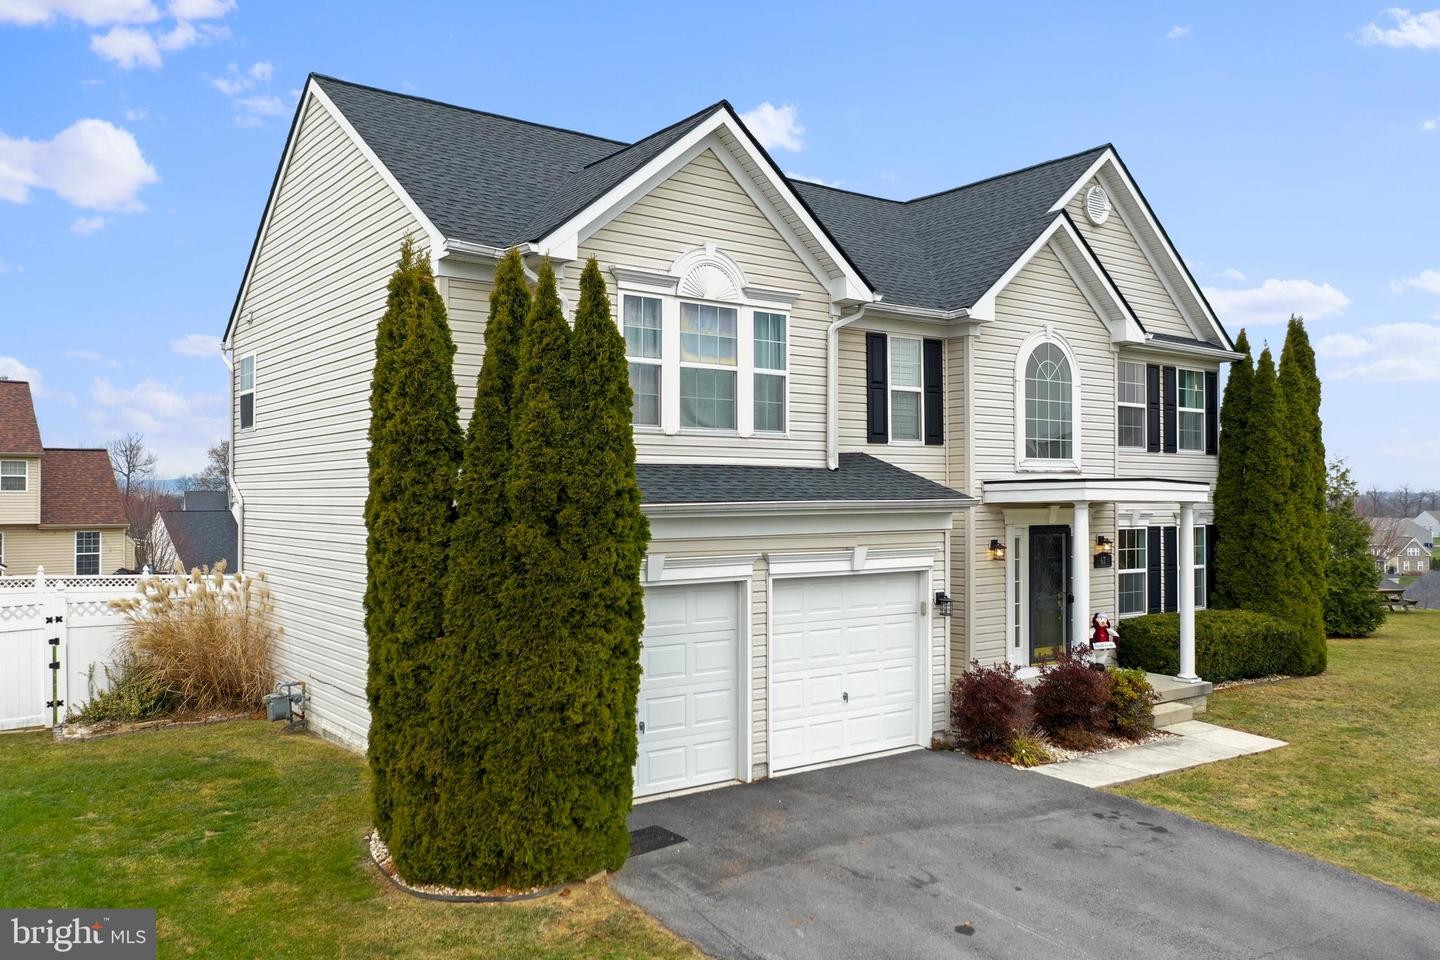 2. 67 Bridle Hill Ct